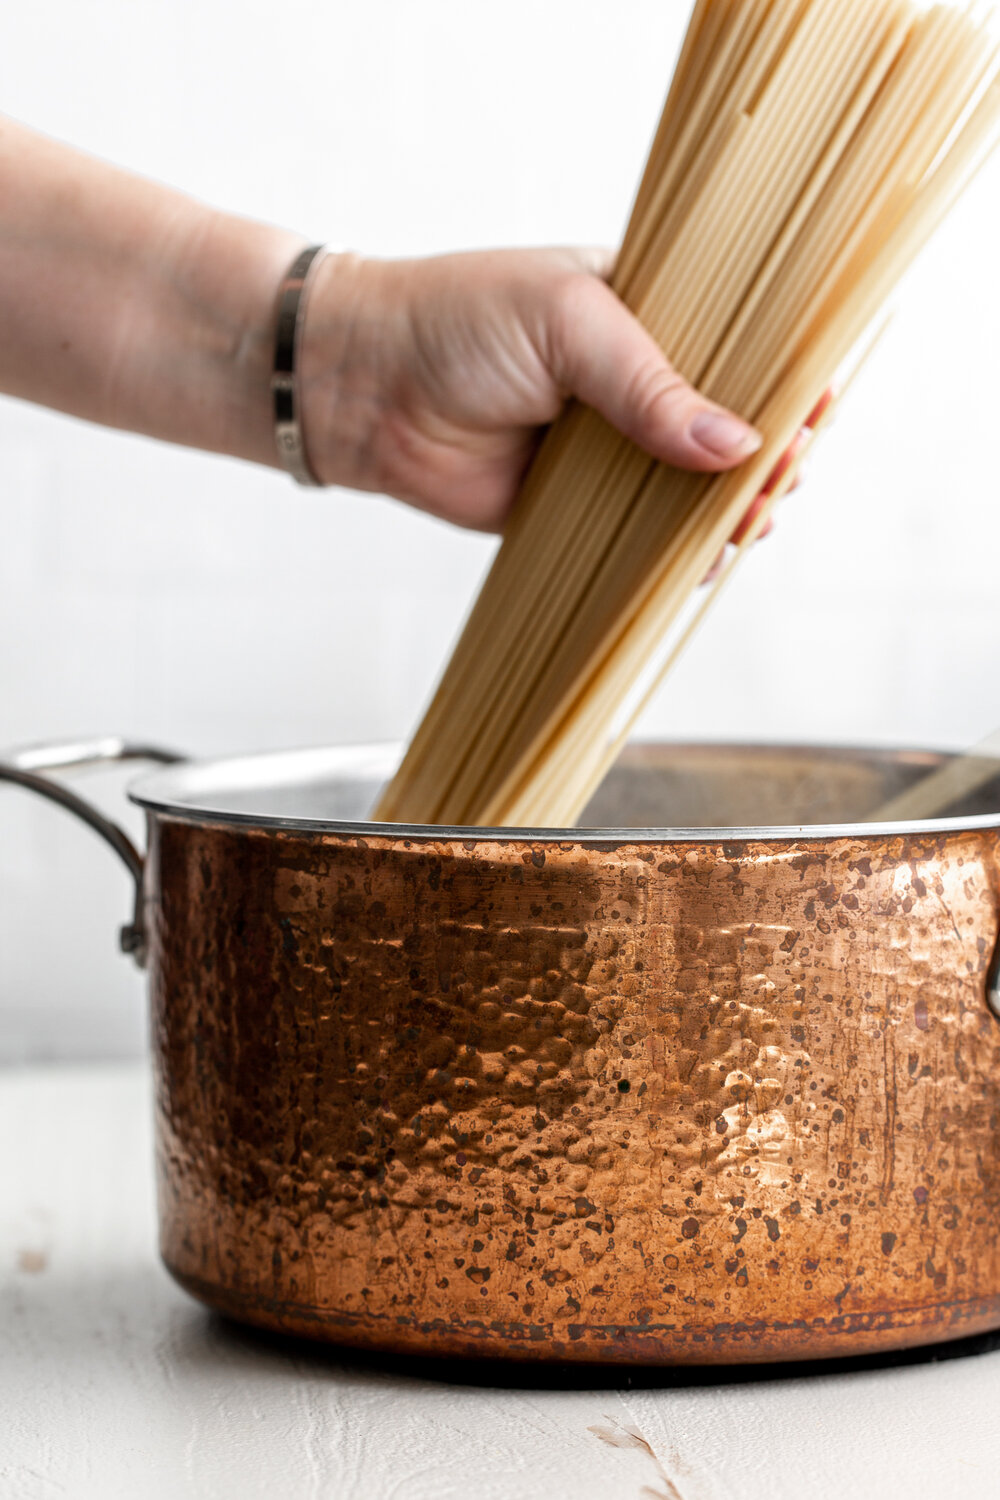 cooking bucatini pasta in copper pot